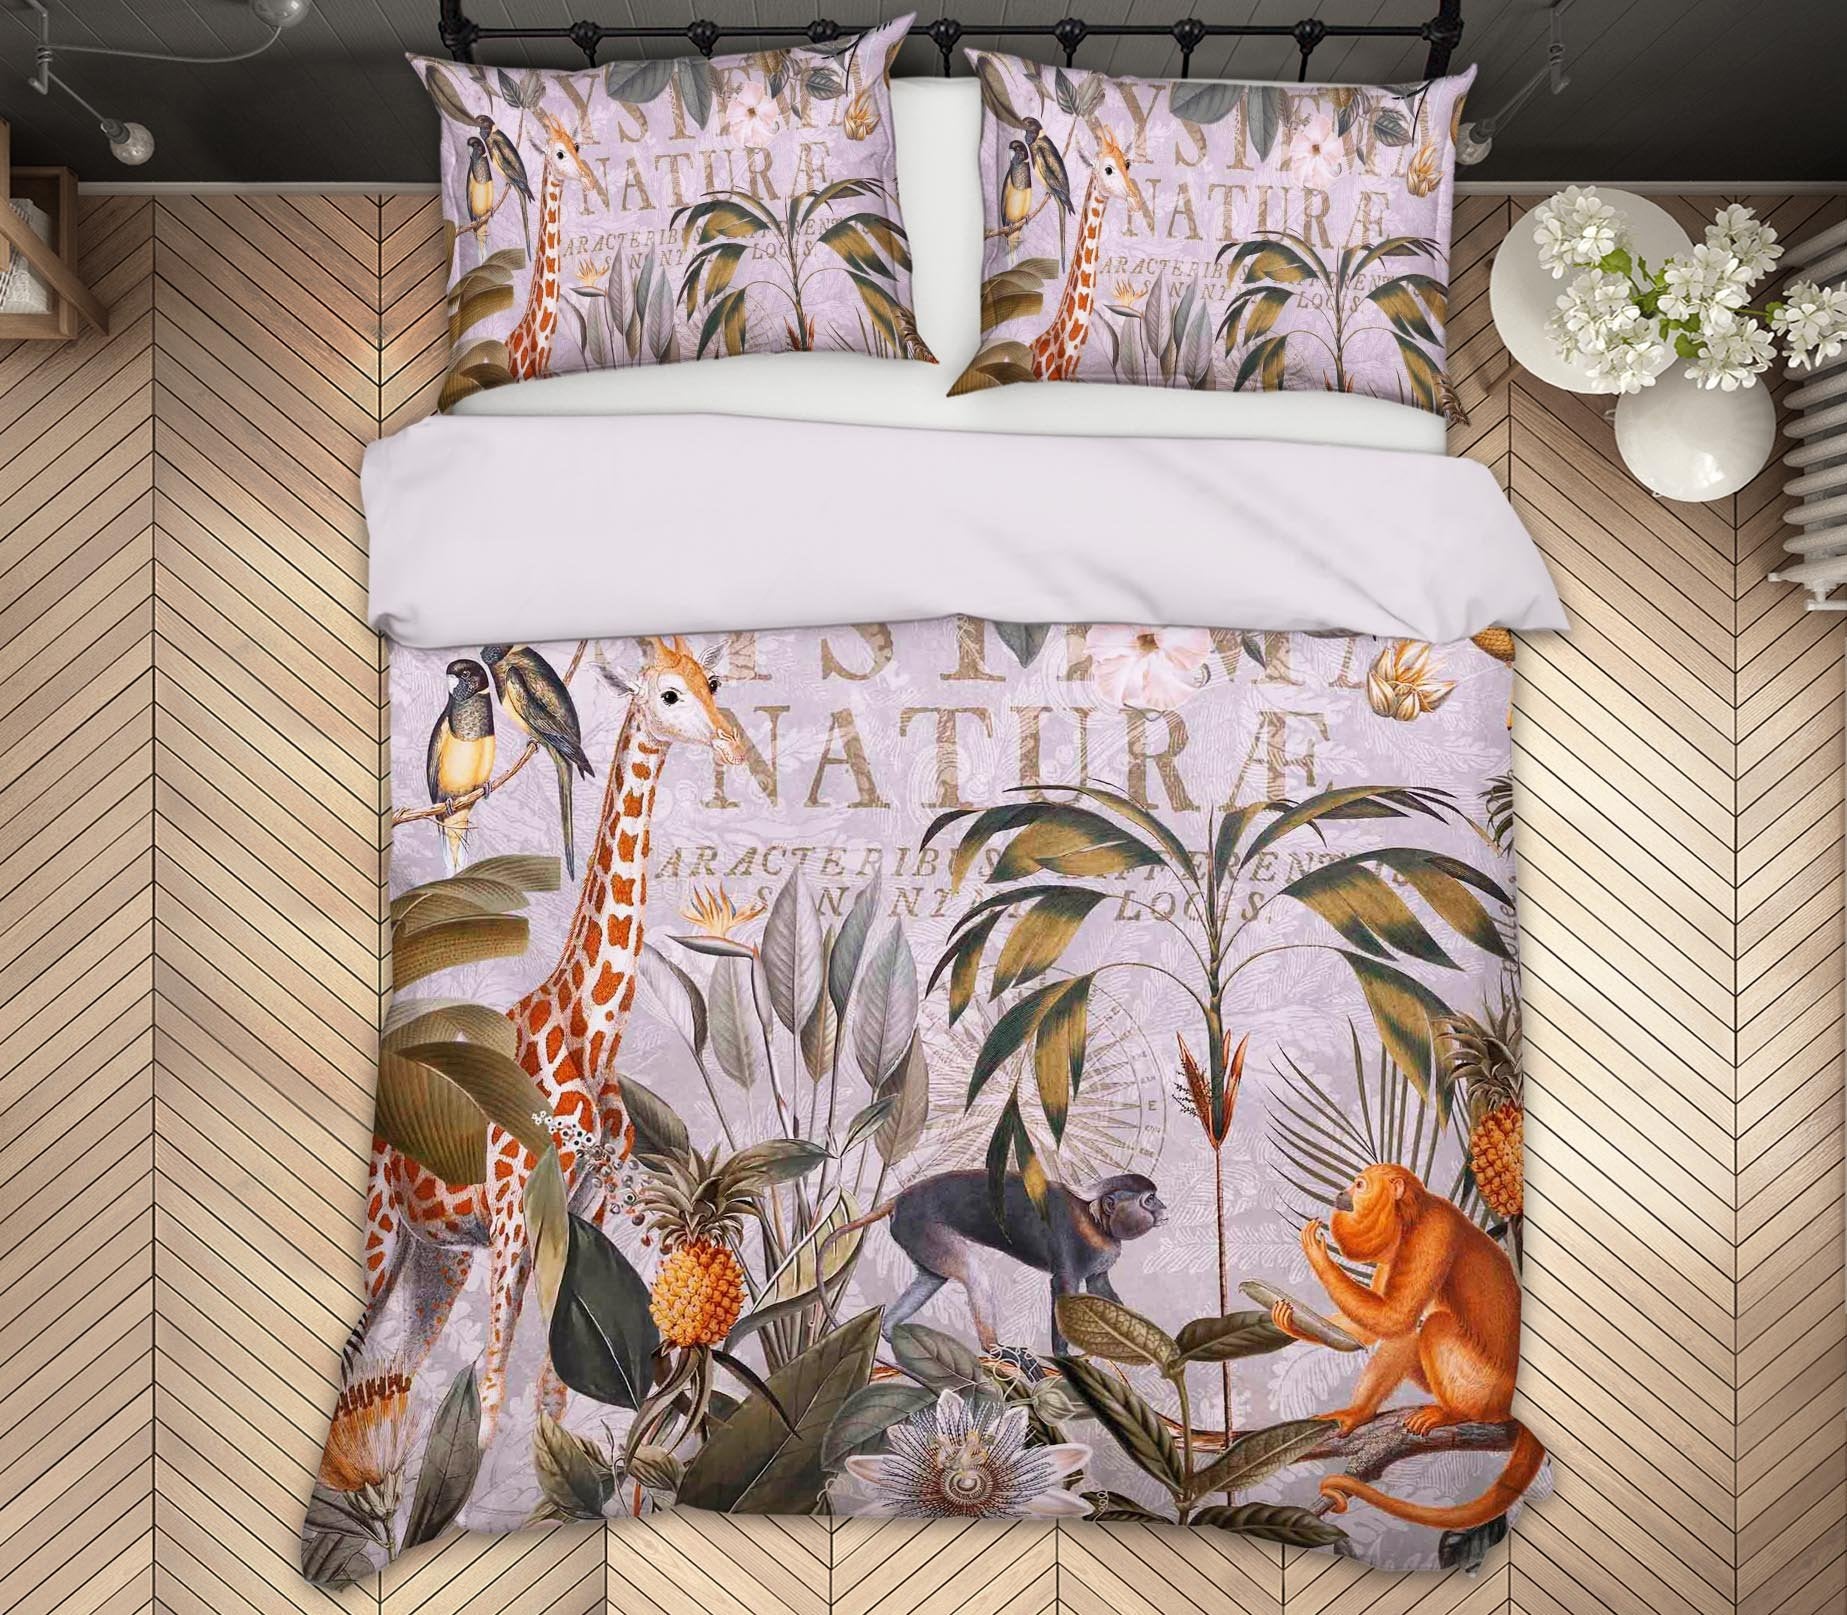 3D Animal Home 2138 Andrea haase Bedding Bed Pillowcases Quilt Quiet Covers AJ Creativity Home 